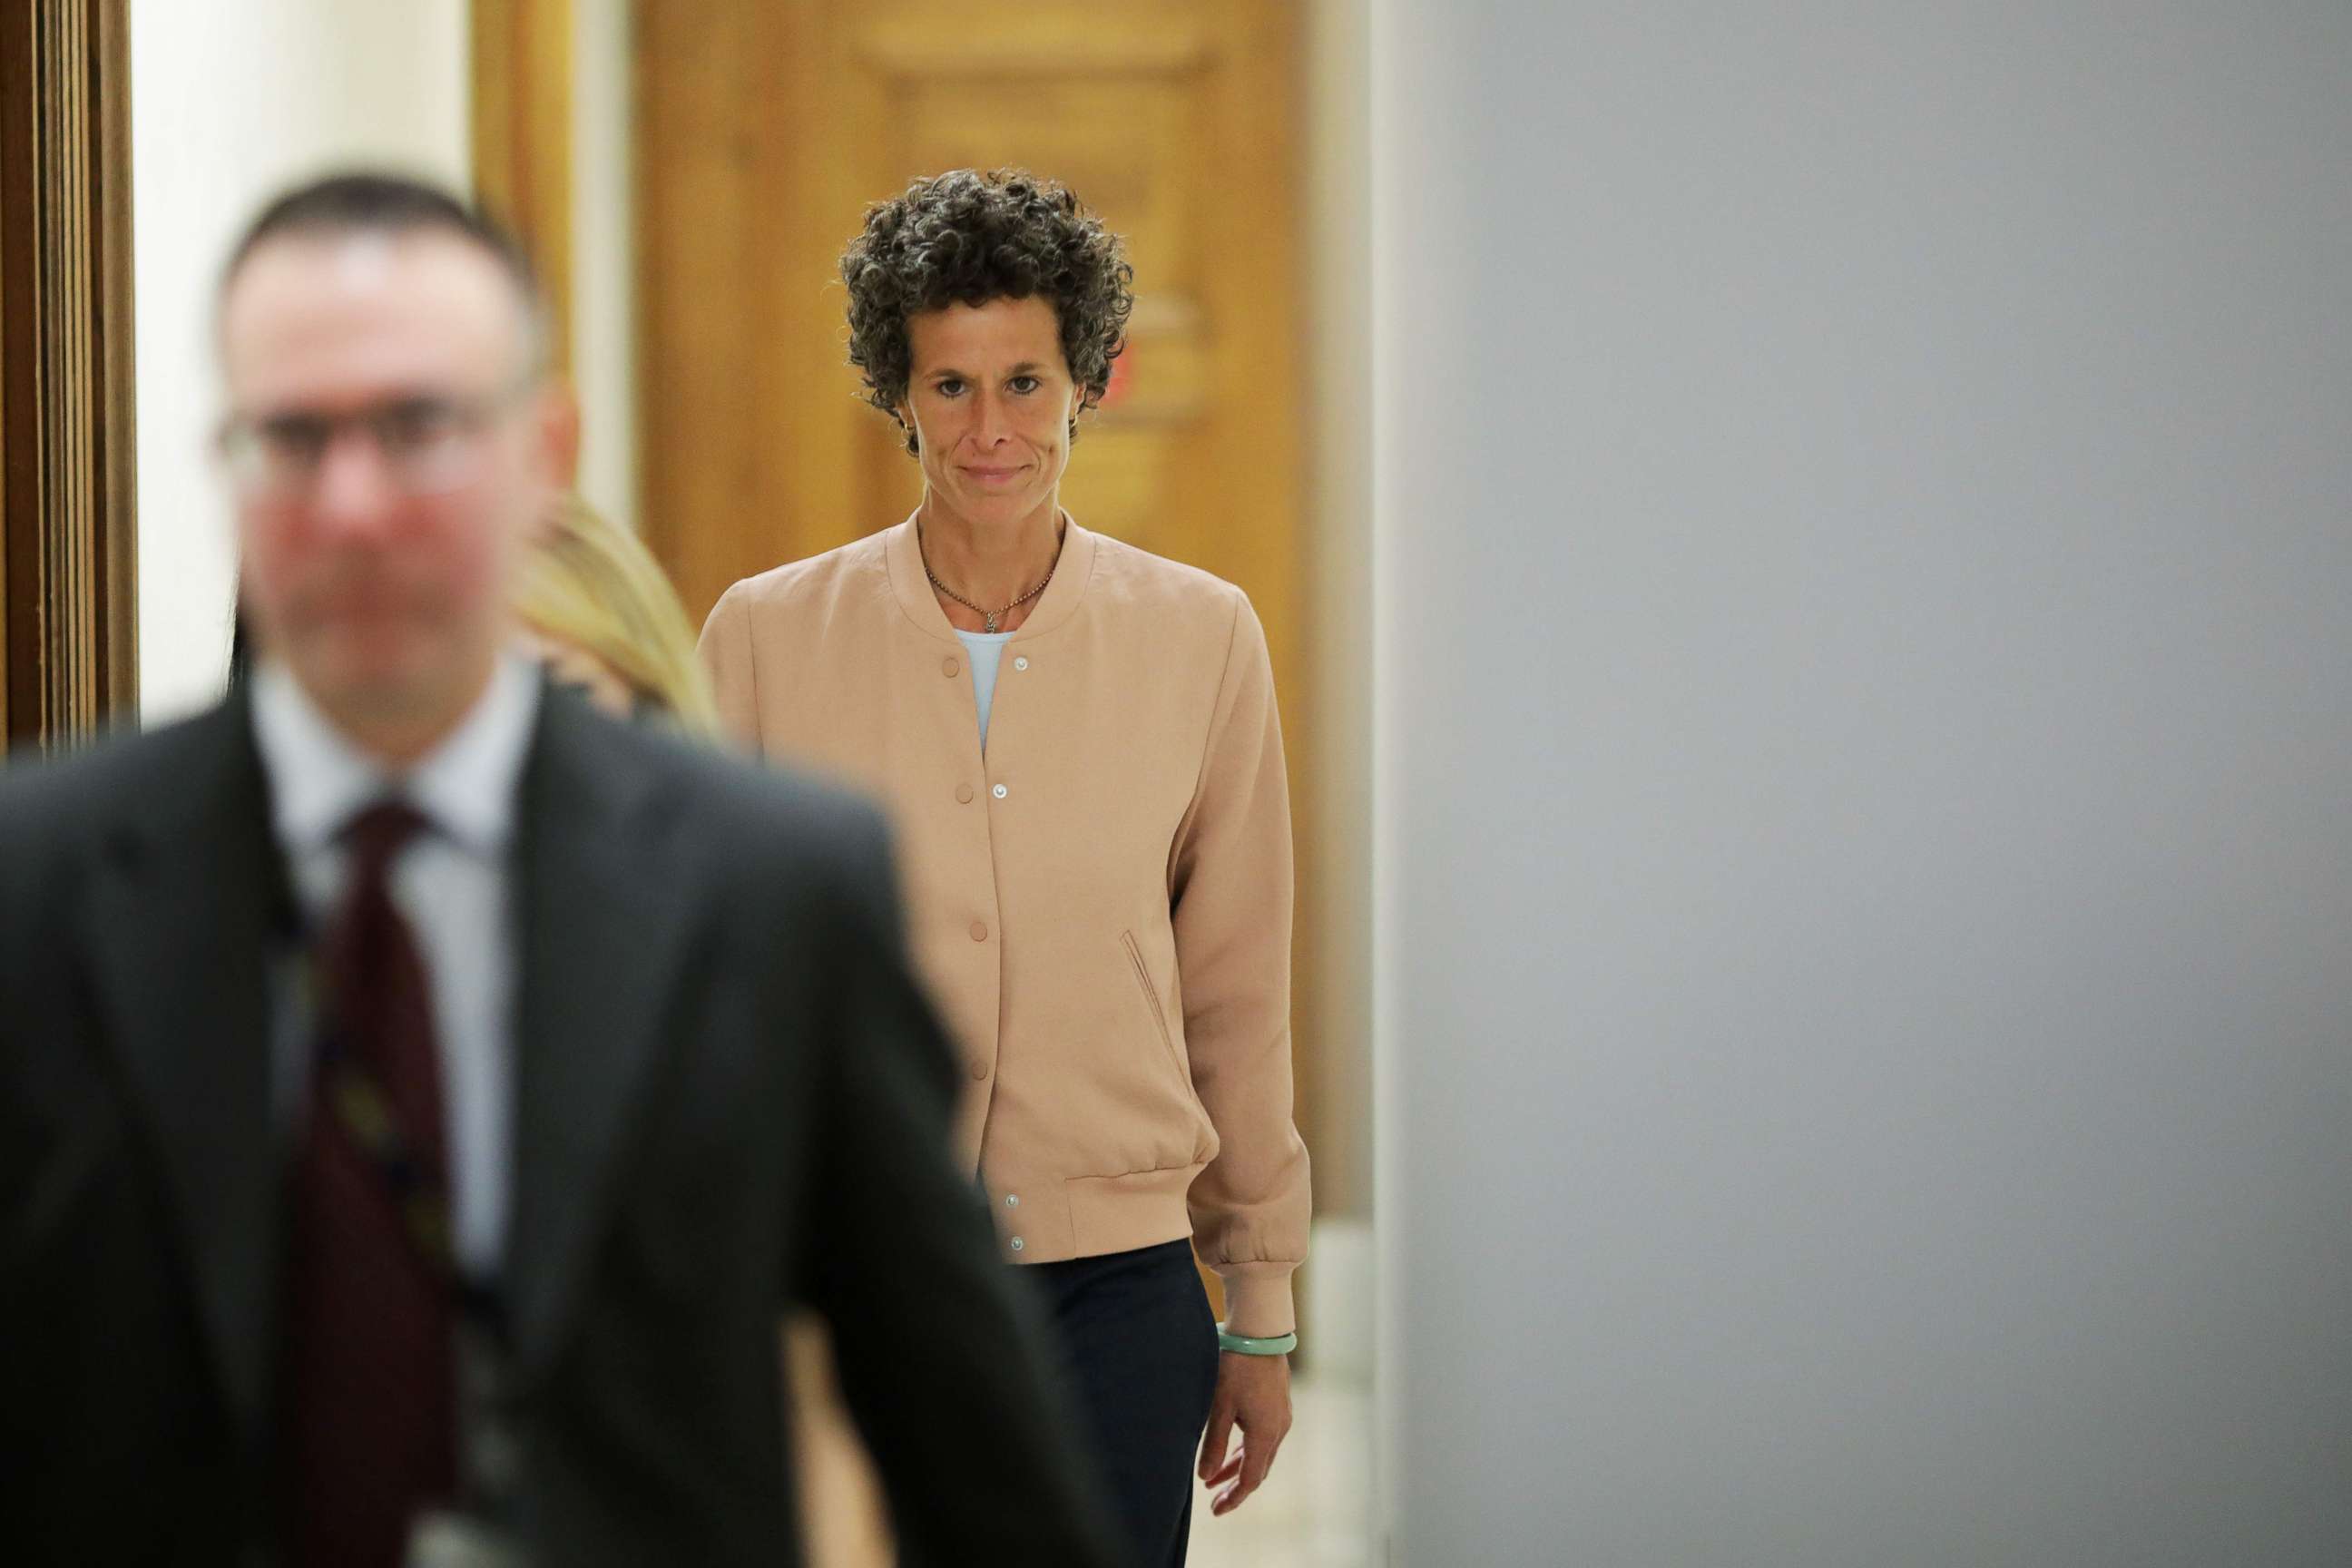 PHOTO: Andrea Constand, key witness in the case against actor and comedian Bill Cosby, leaves the courtroom during a recess on the sixth day of Cosby's sexual assault retrial at the Montgomery County Courthouse in Norristown, Pa., April 16, 2018.